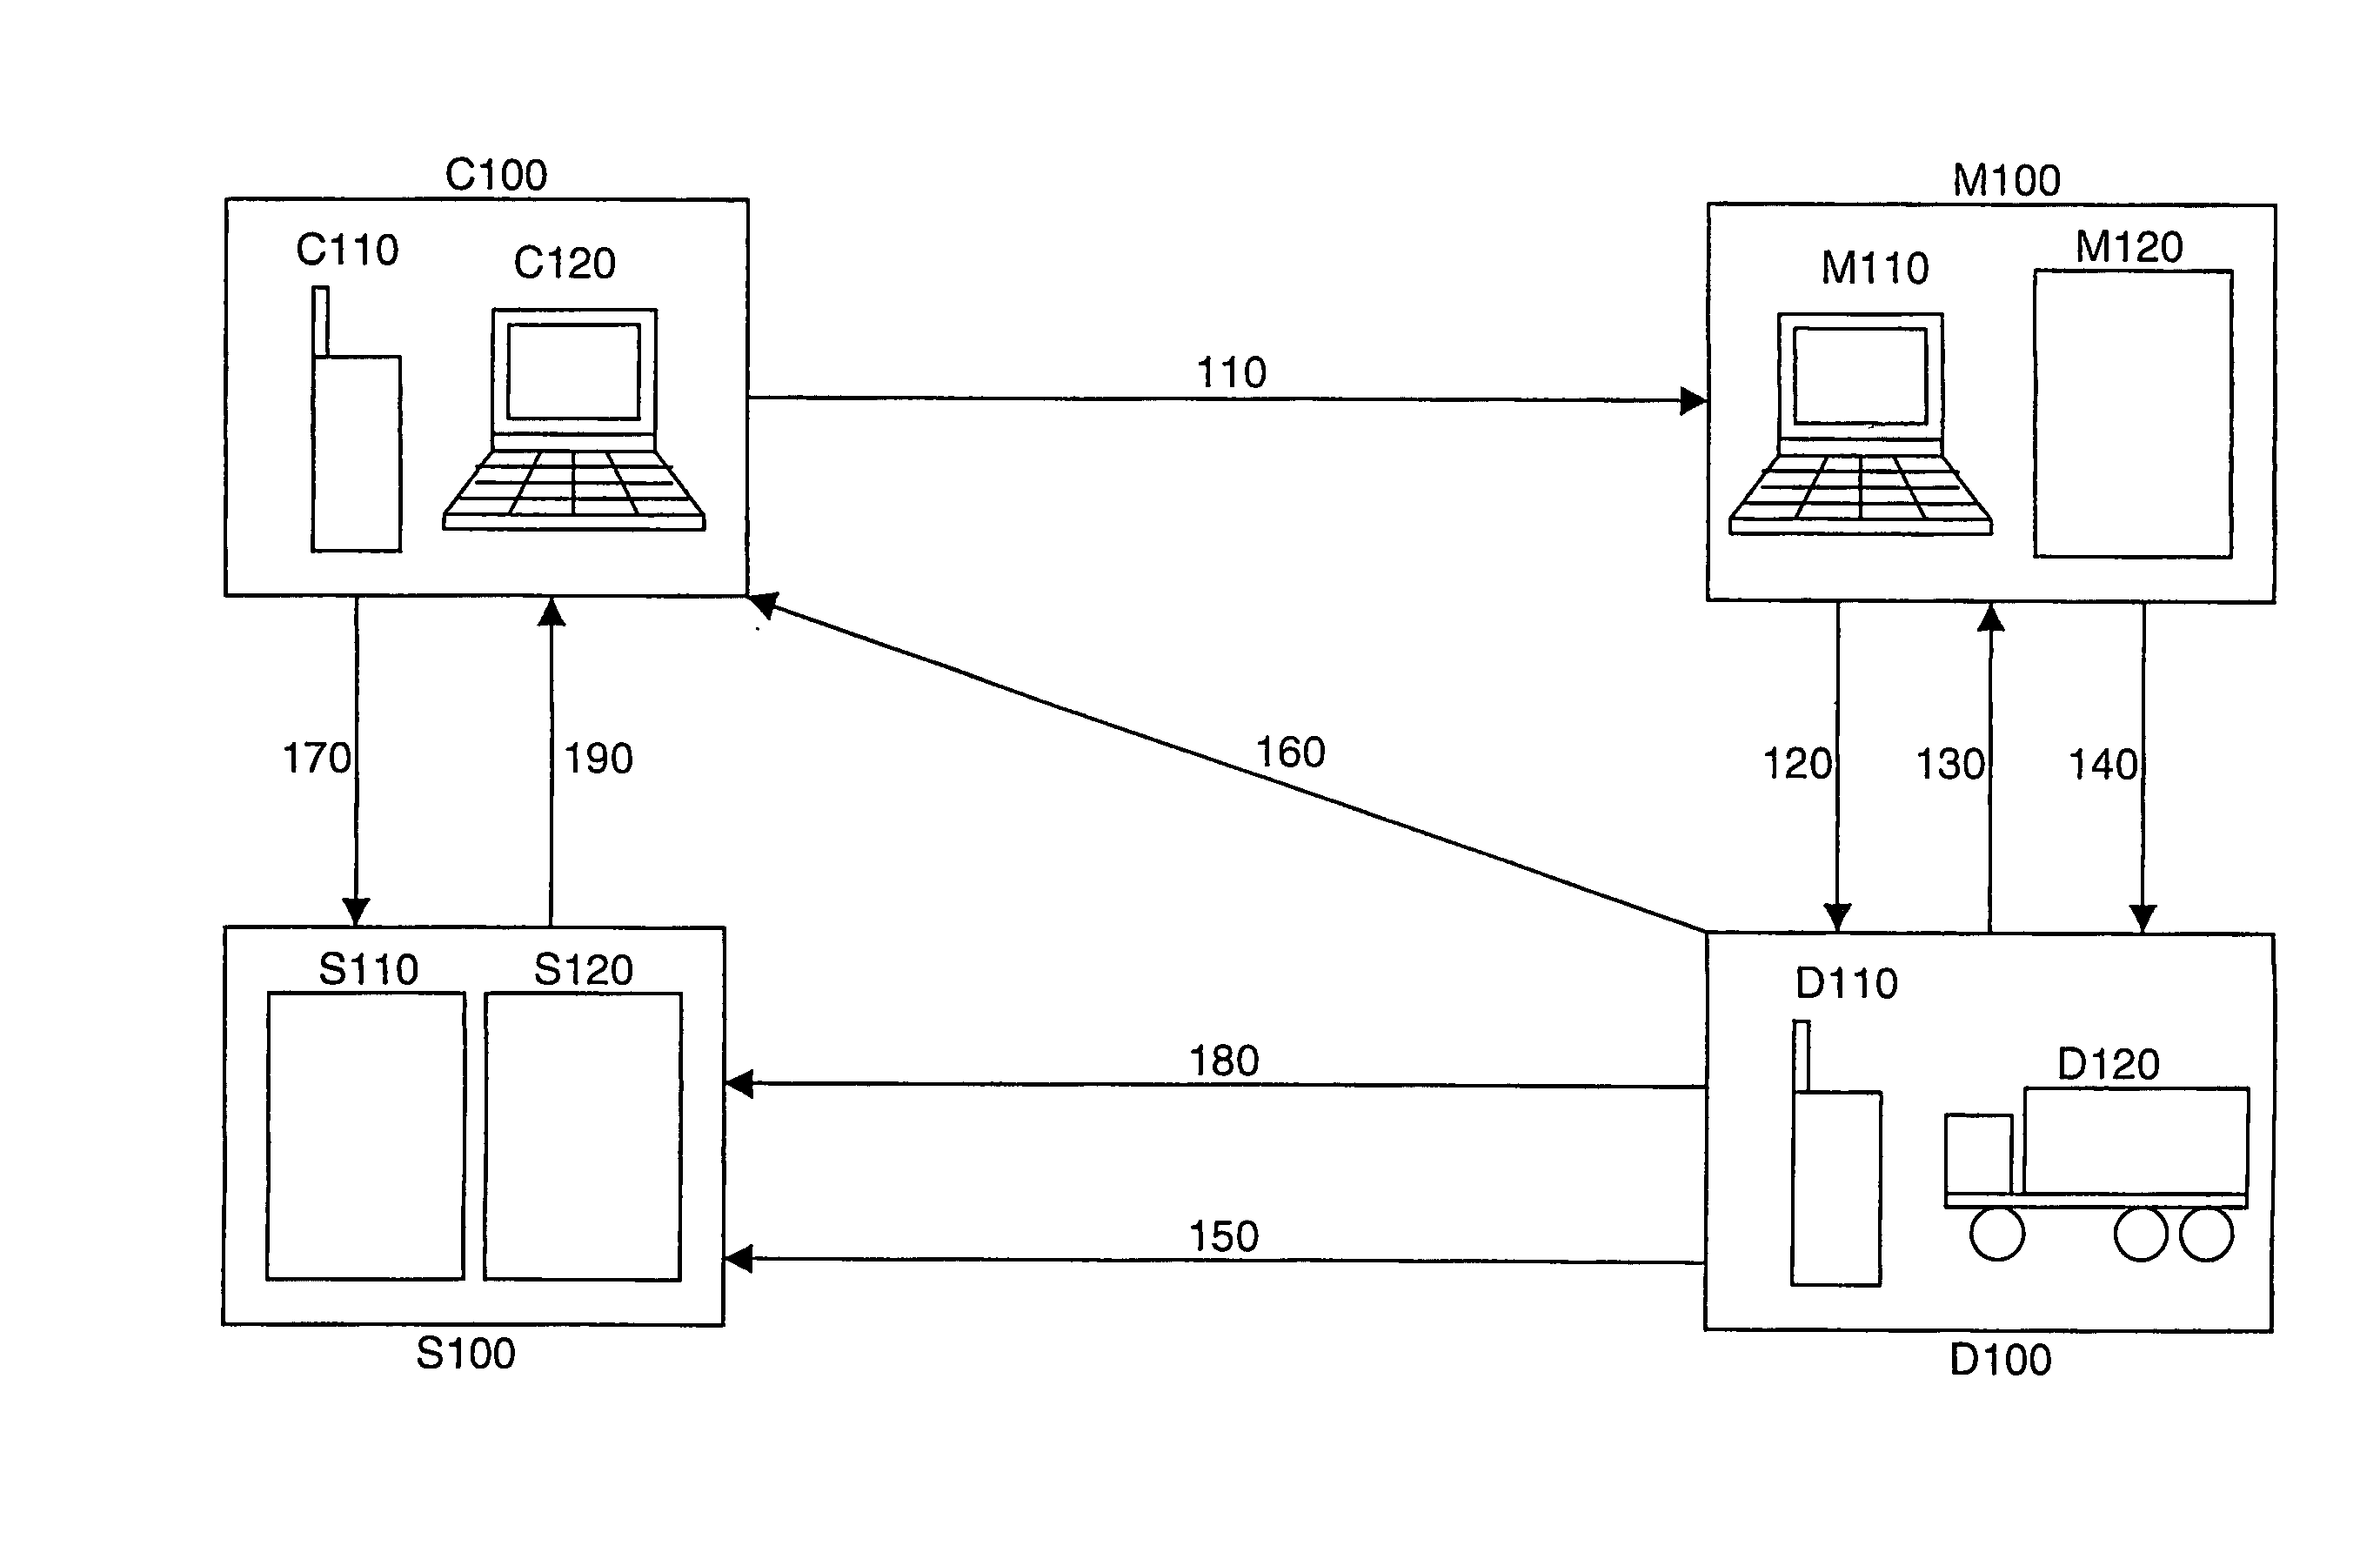 Method and Device for Delivery or Obtaining of a Good